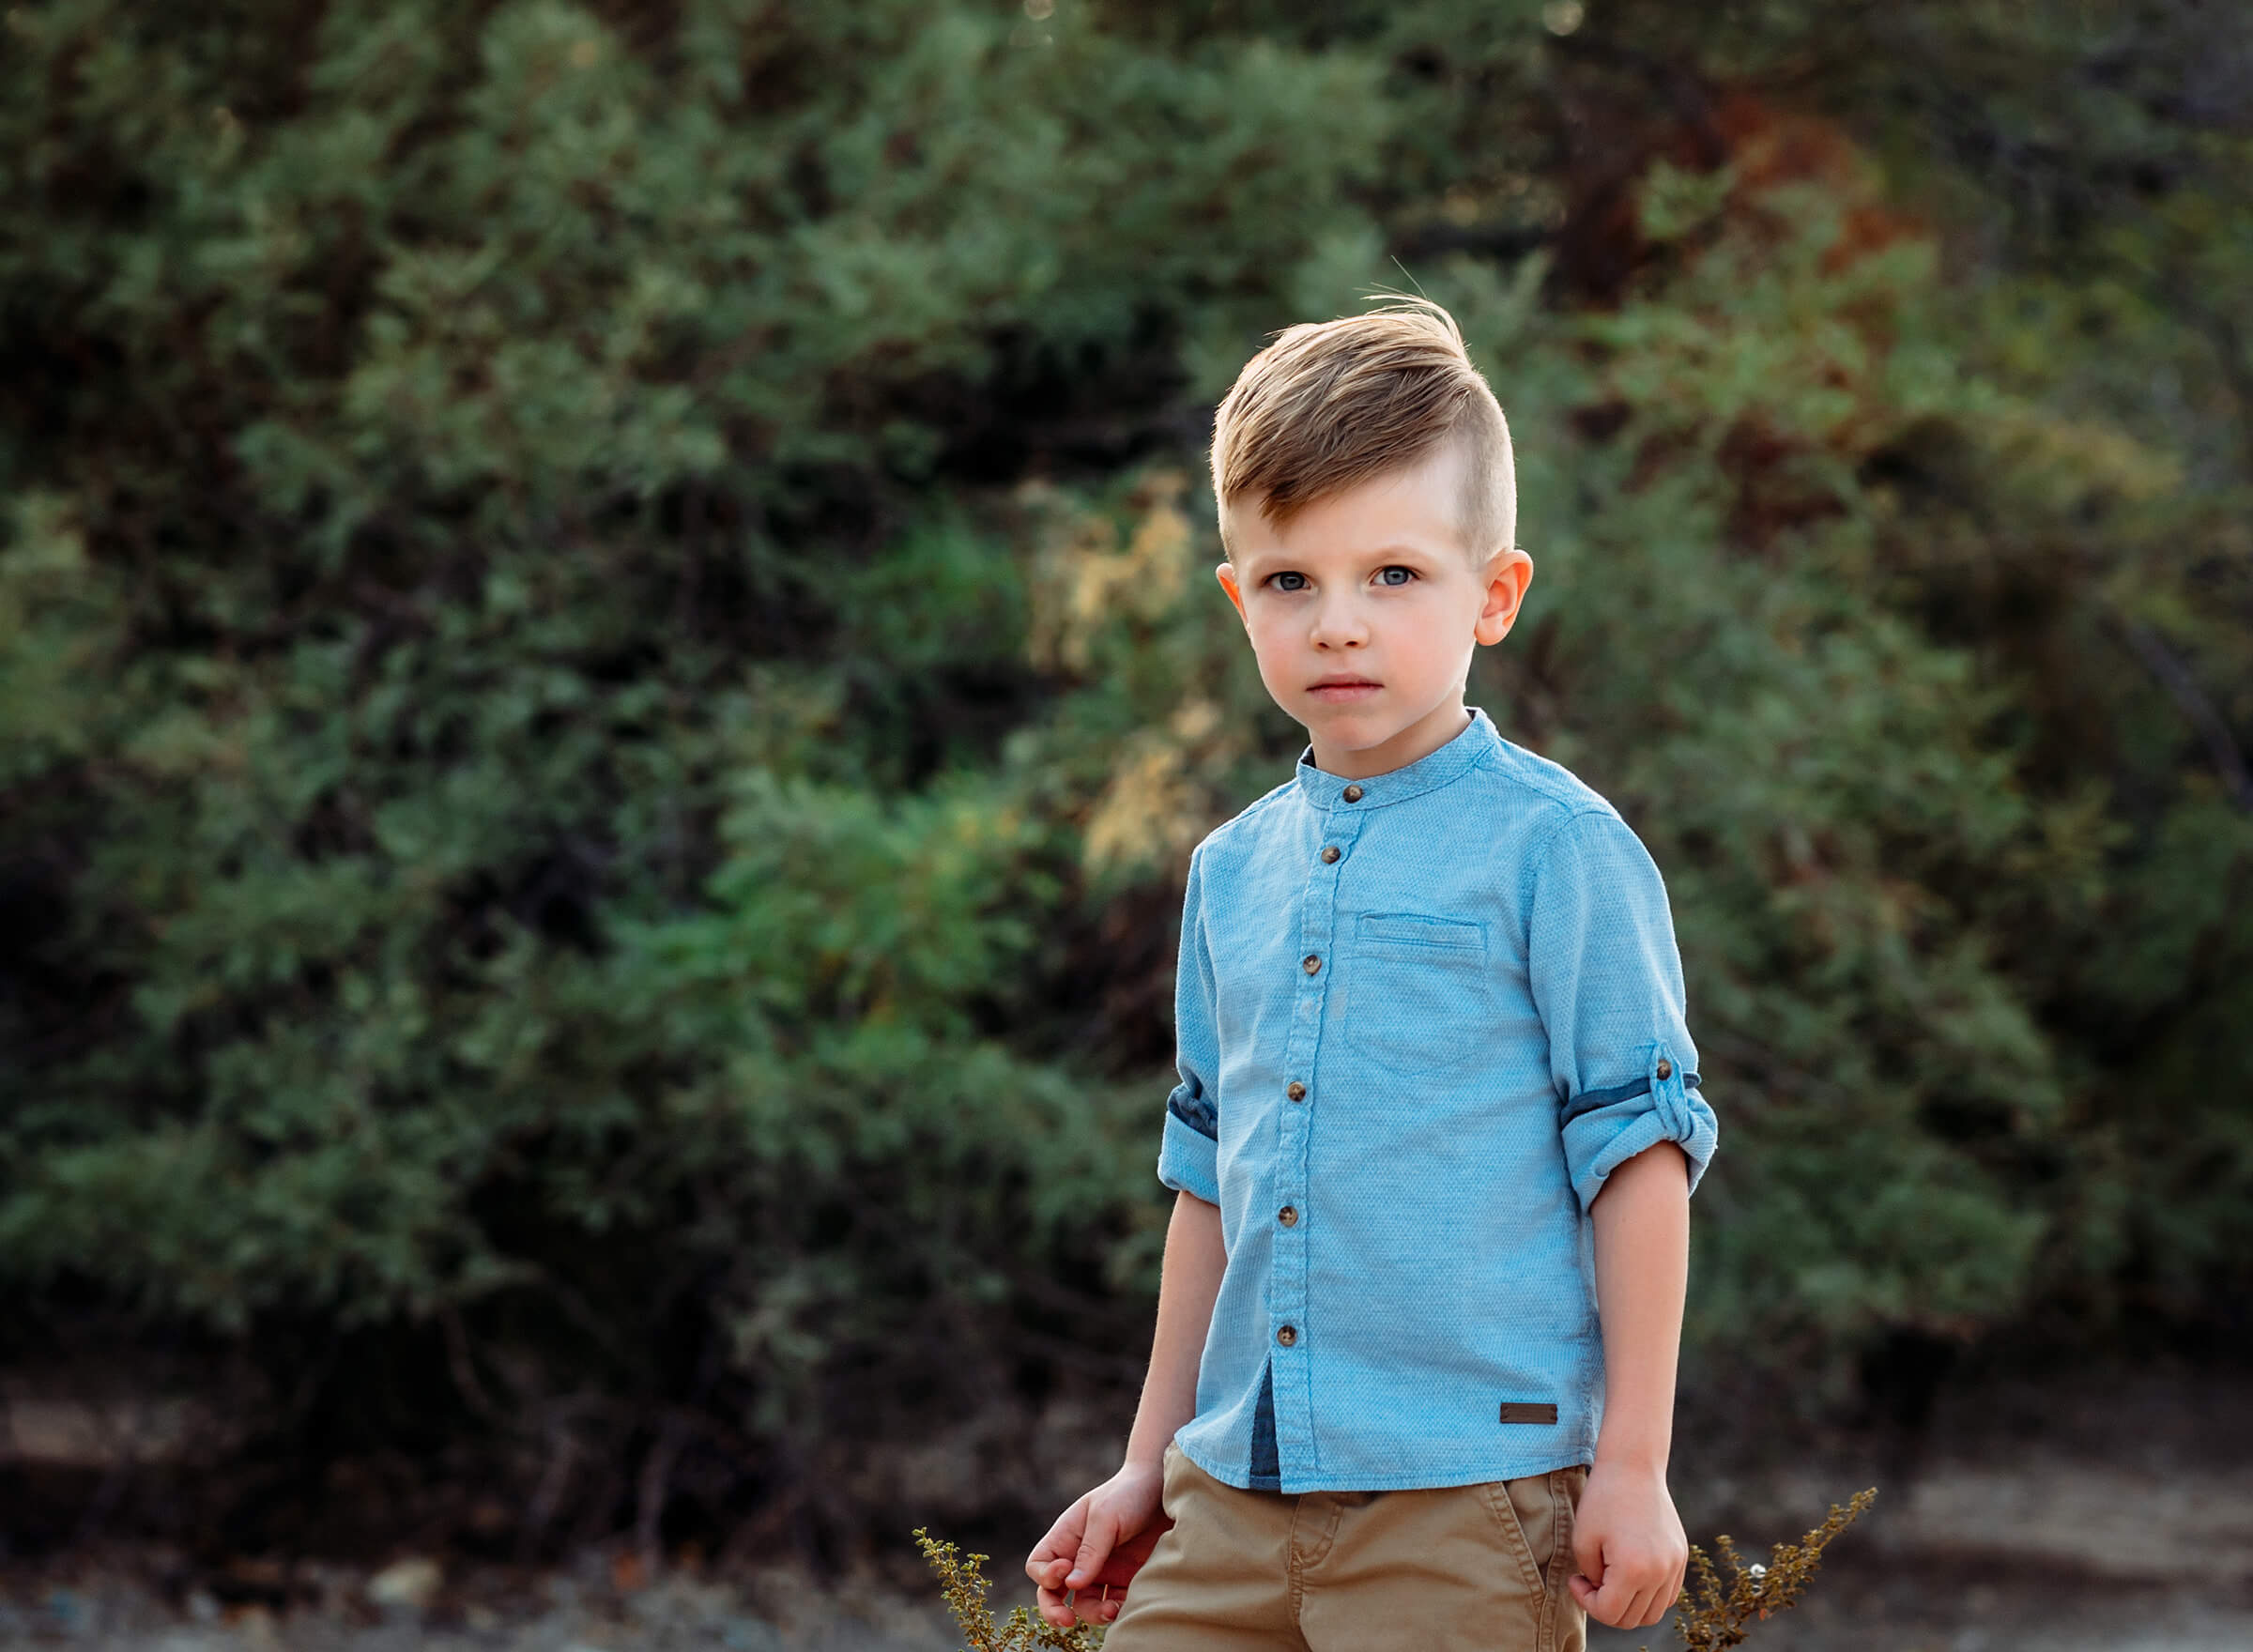 capturing personality of children during family sessions